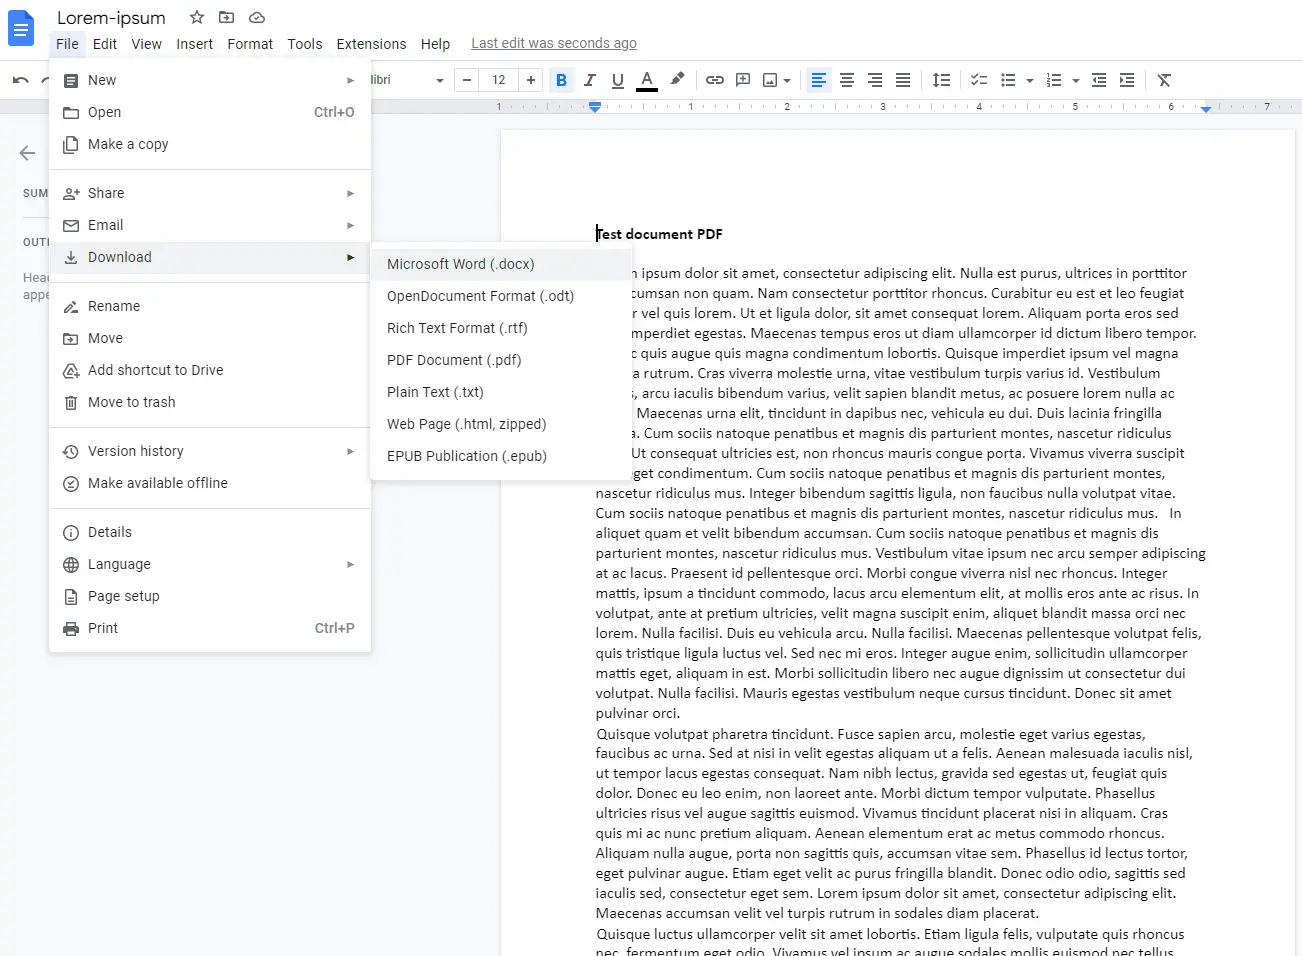 Download the file as MS Word to Convert PDF to word